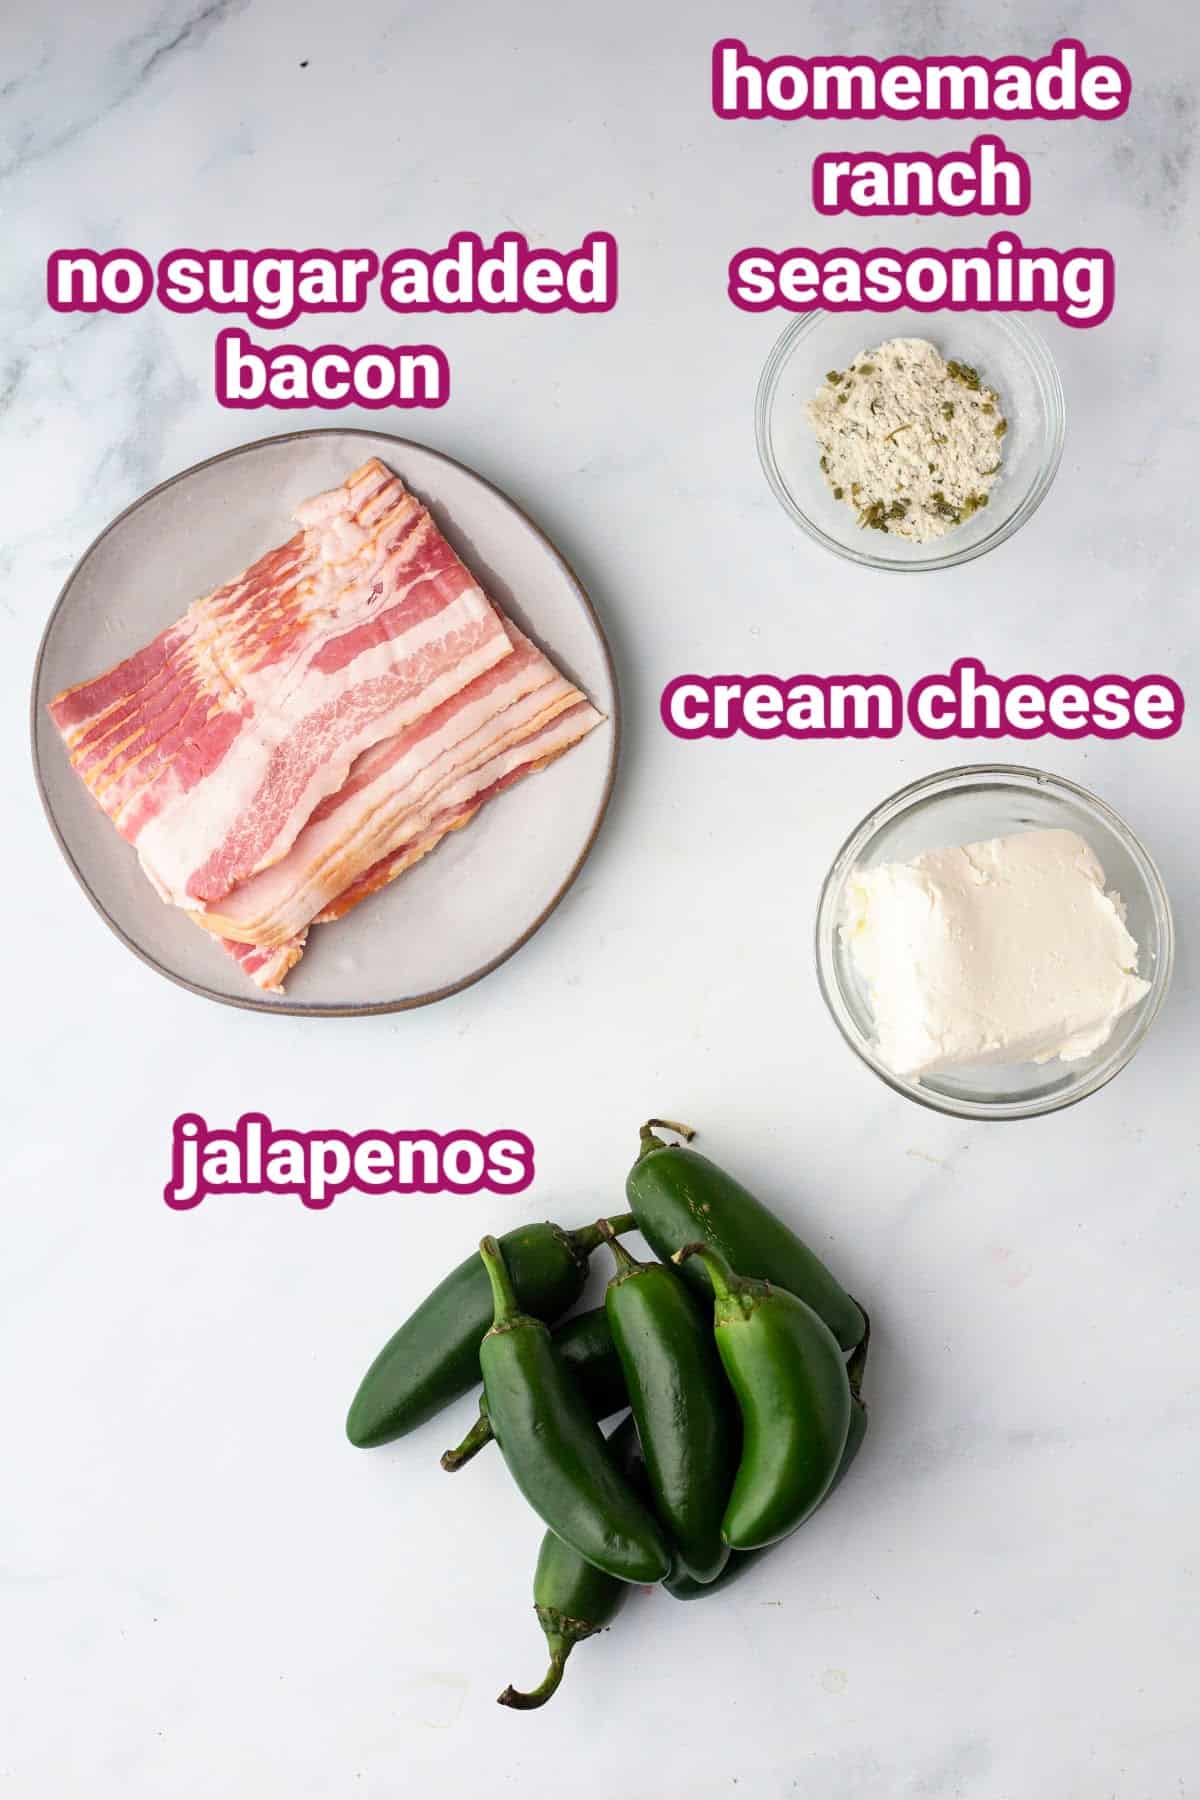 recipe ingredients for keto jalapeno poppers, bacon, cream cheese, jalapeños, and ranch seasoning